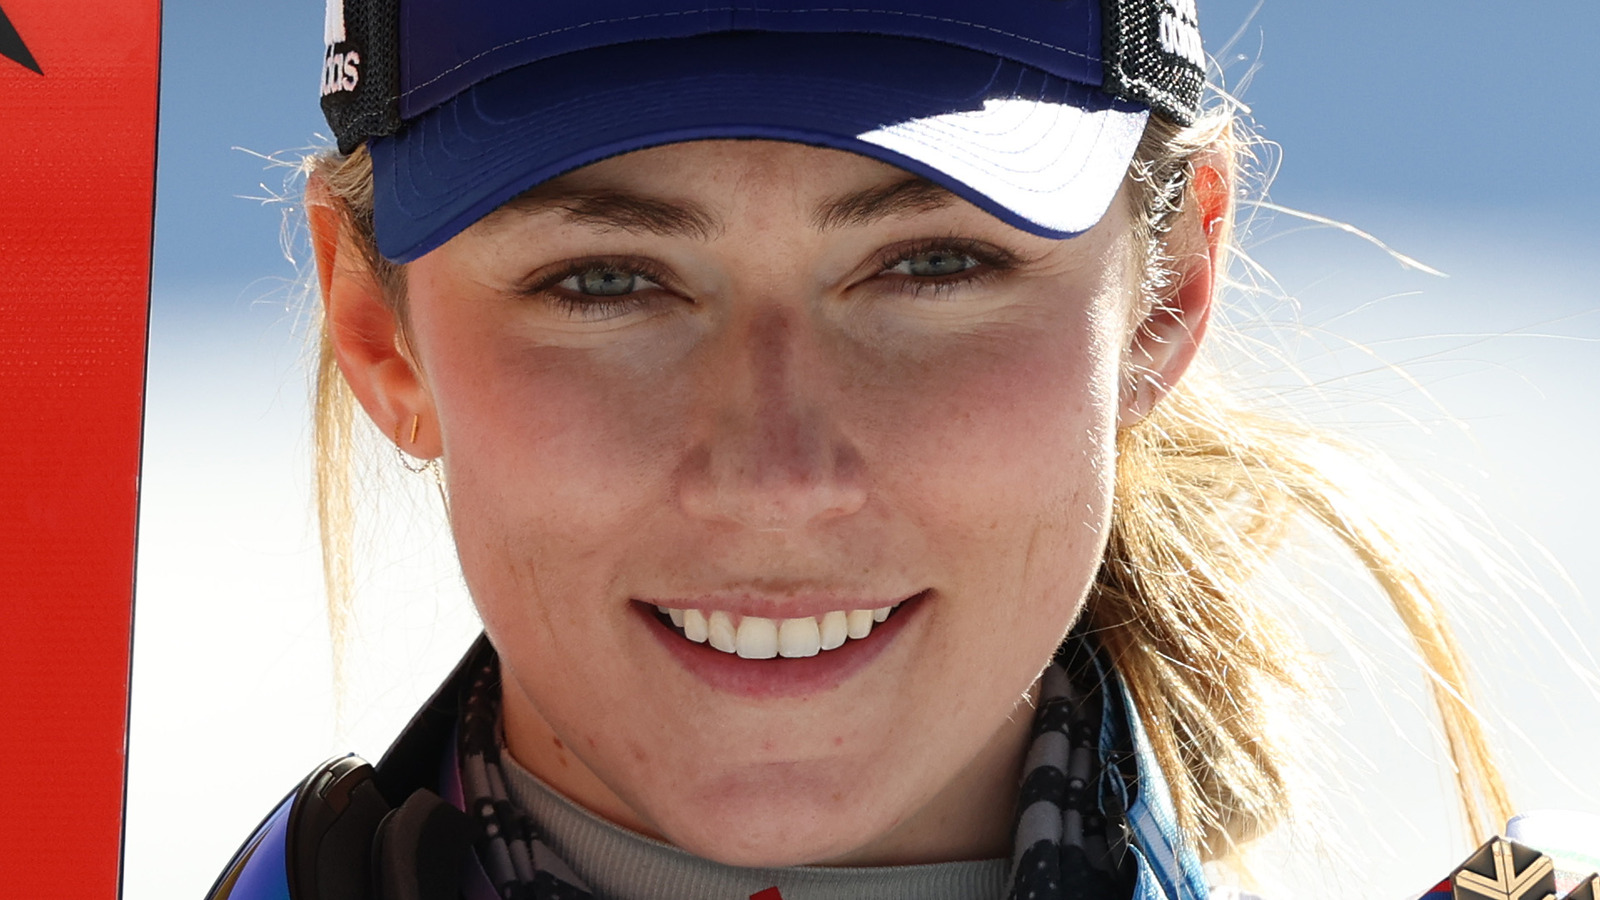 Mikaela Shiffrin has an intense schedule, one that typically involves wakin...